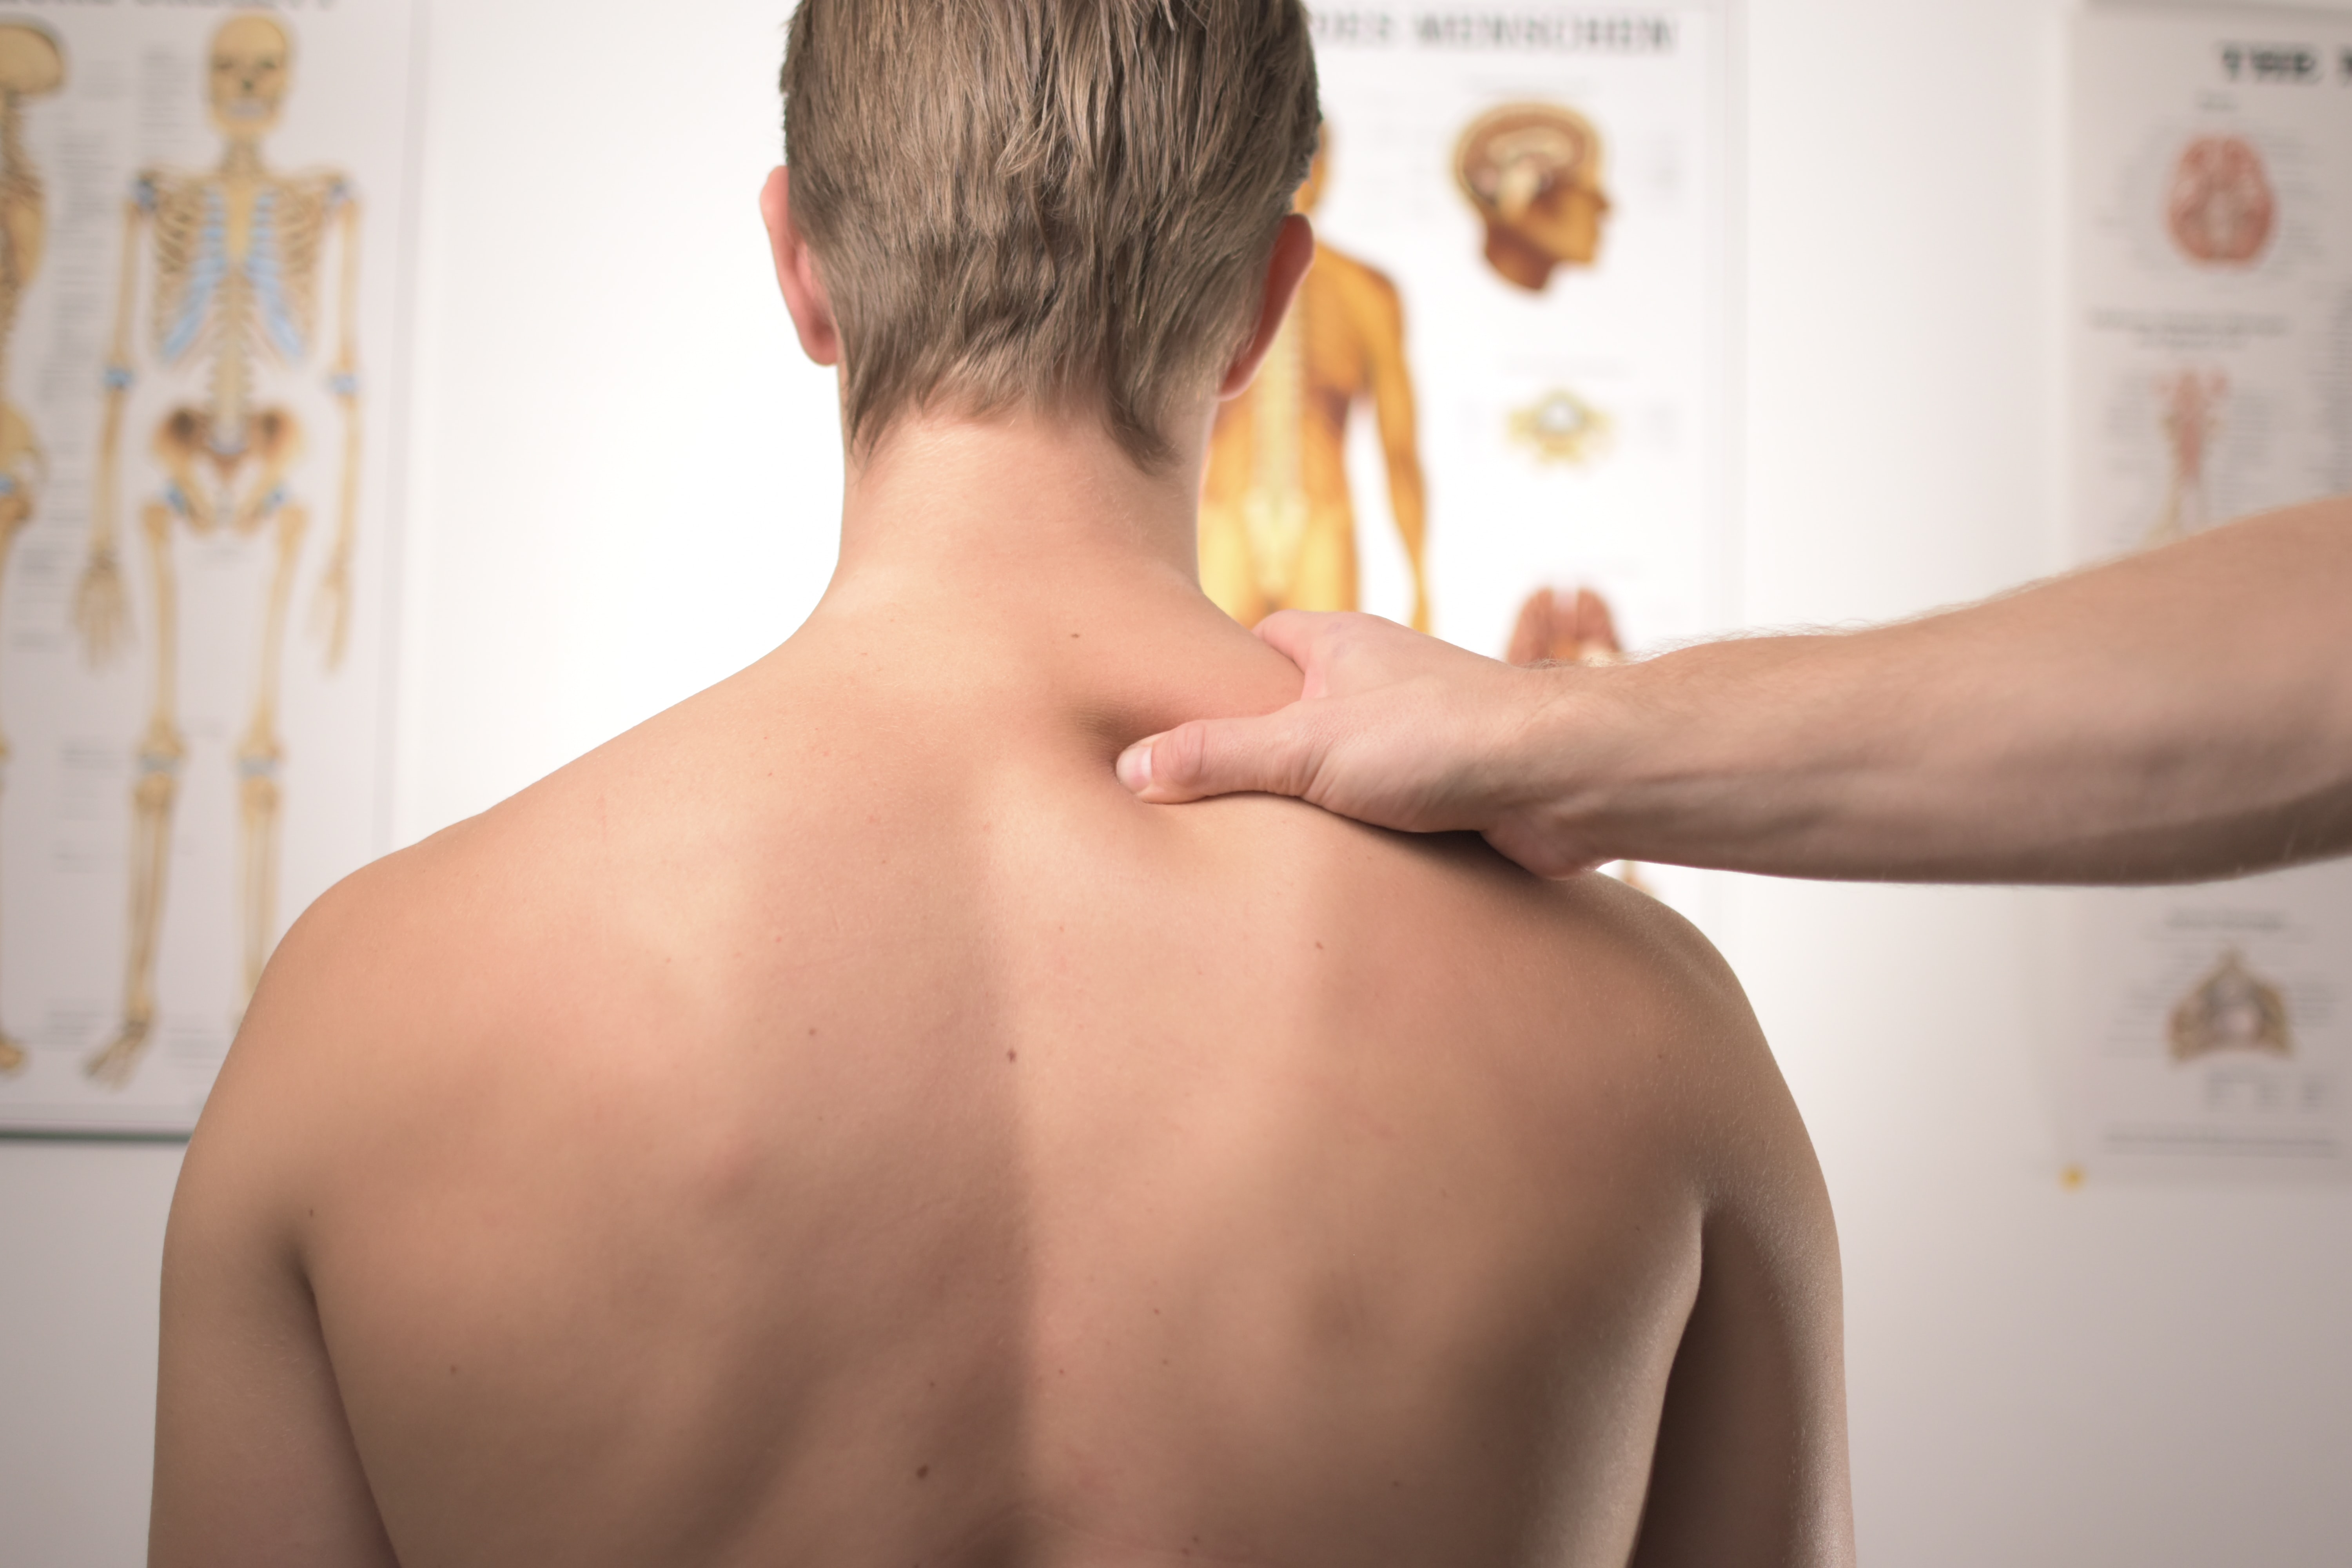 What's Causing Your Upper Back Pain? - University Health News